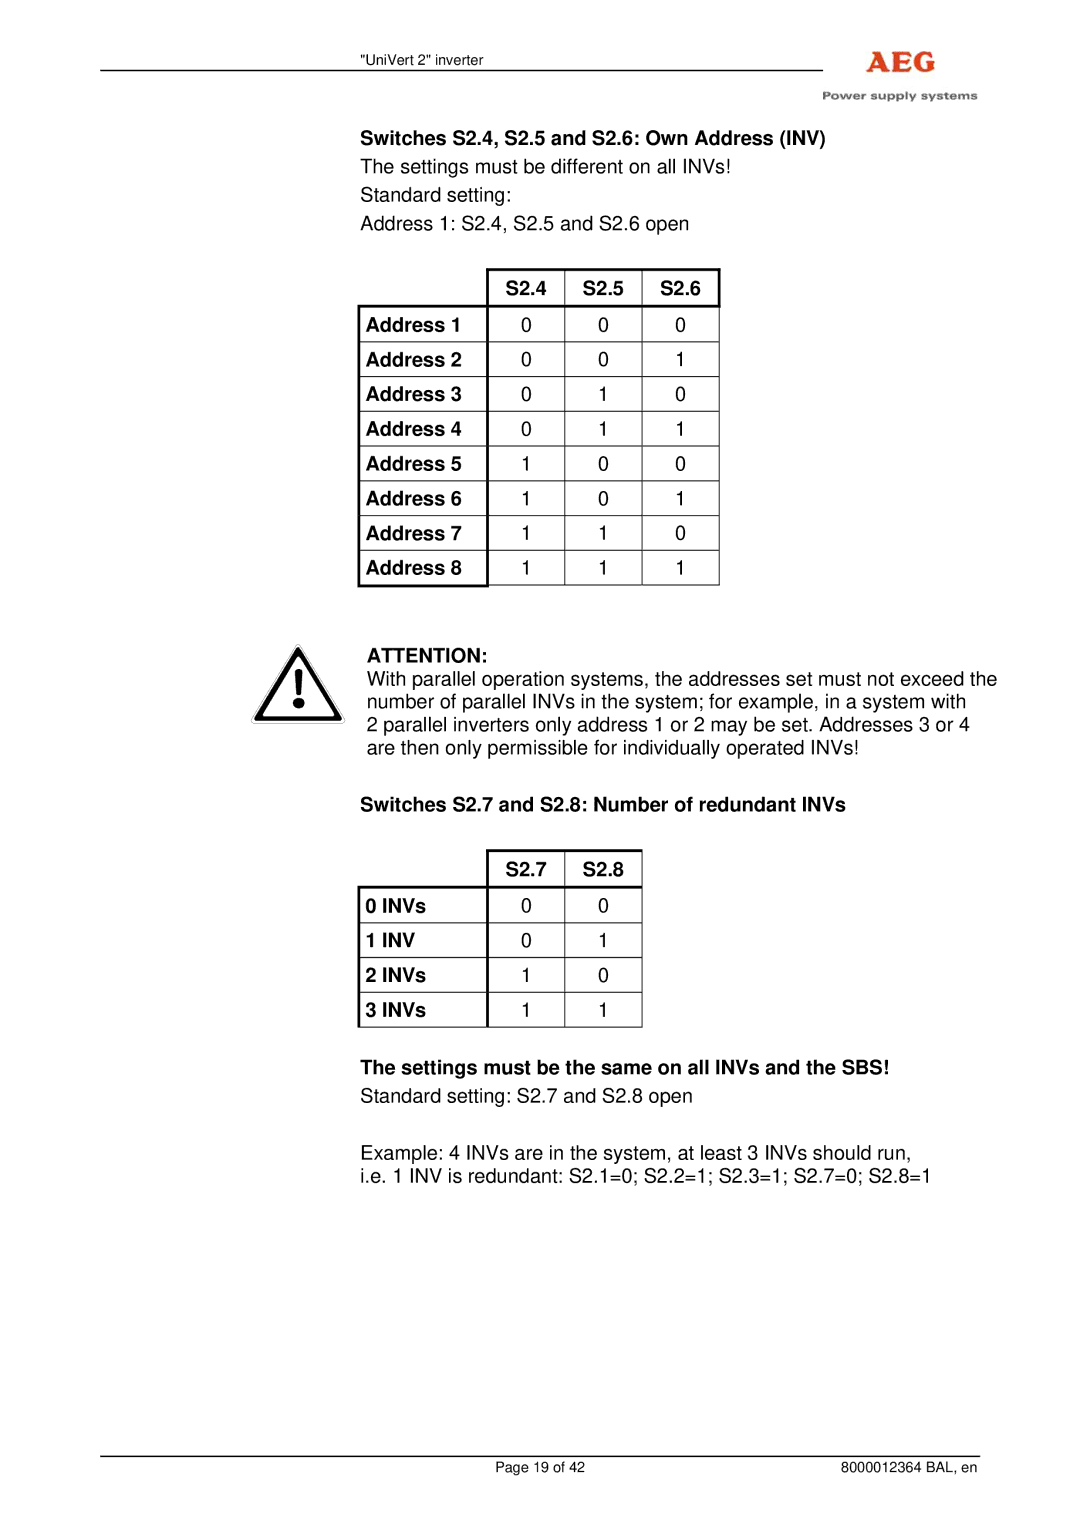 AEG 8000012364 BAL operating instructions Switches S2.4, S2.5 and S2.6 Own Address INV, S2.4 S2.5 S2.6 Address 